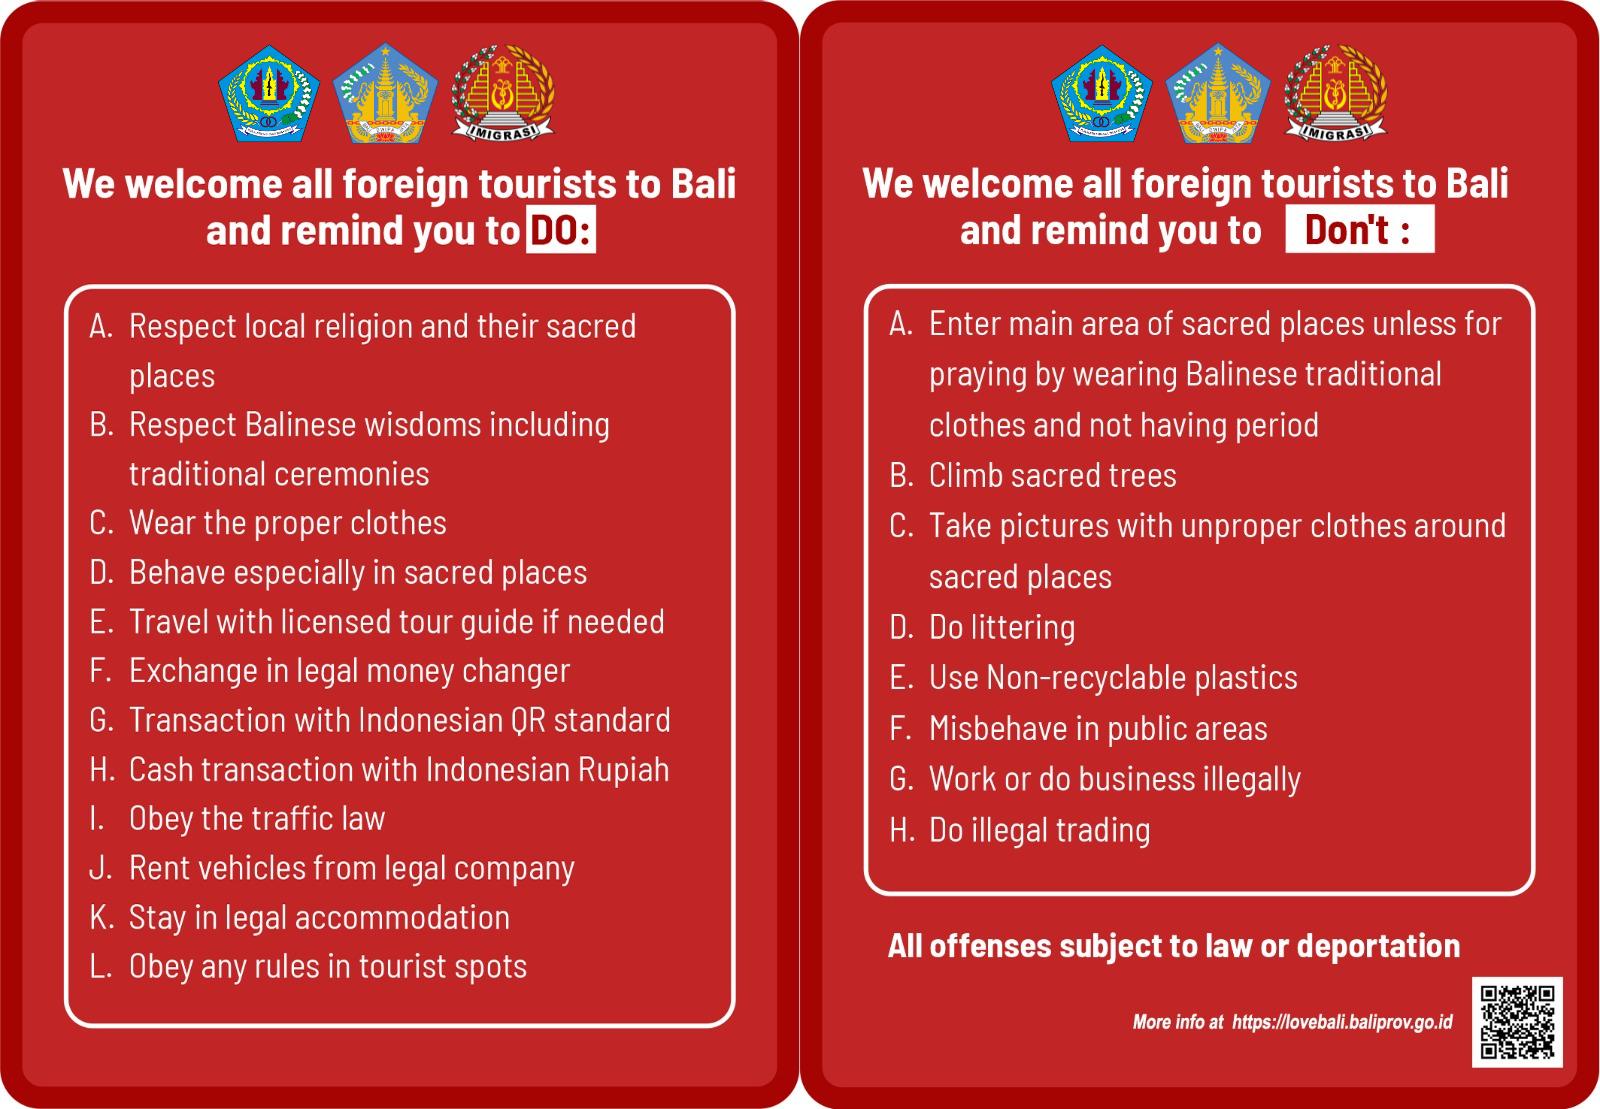 The Provincial Government of Bali issued an official “Do and Don’t” card for foreign tourist while in Bali